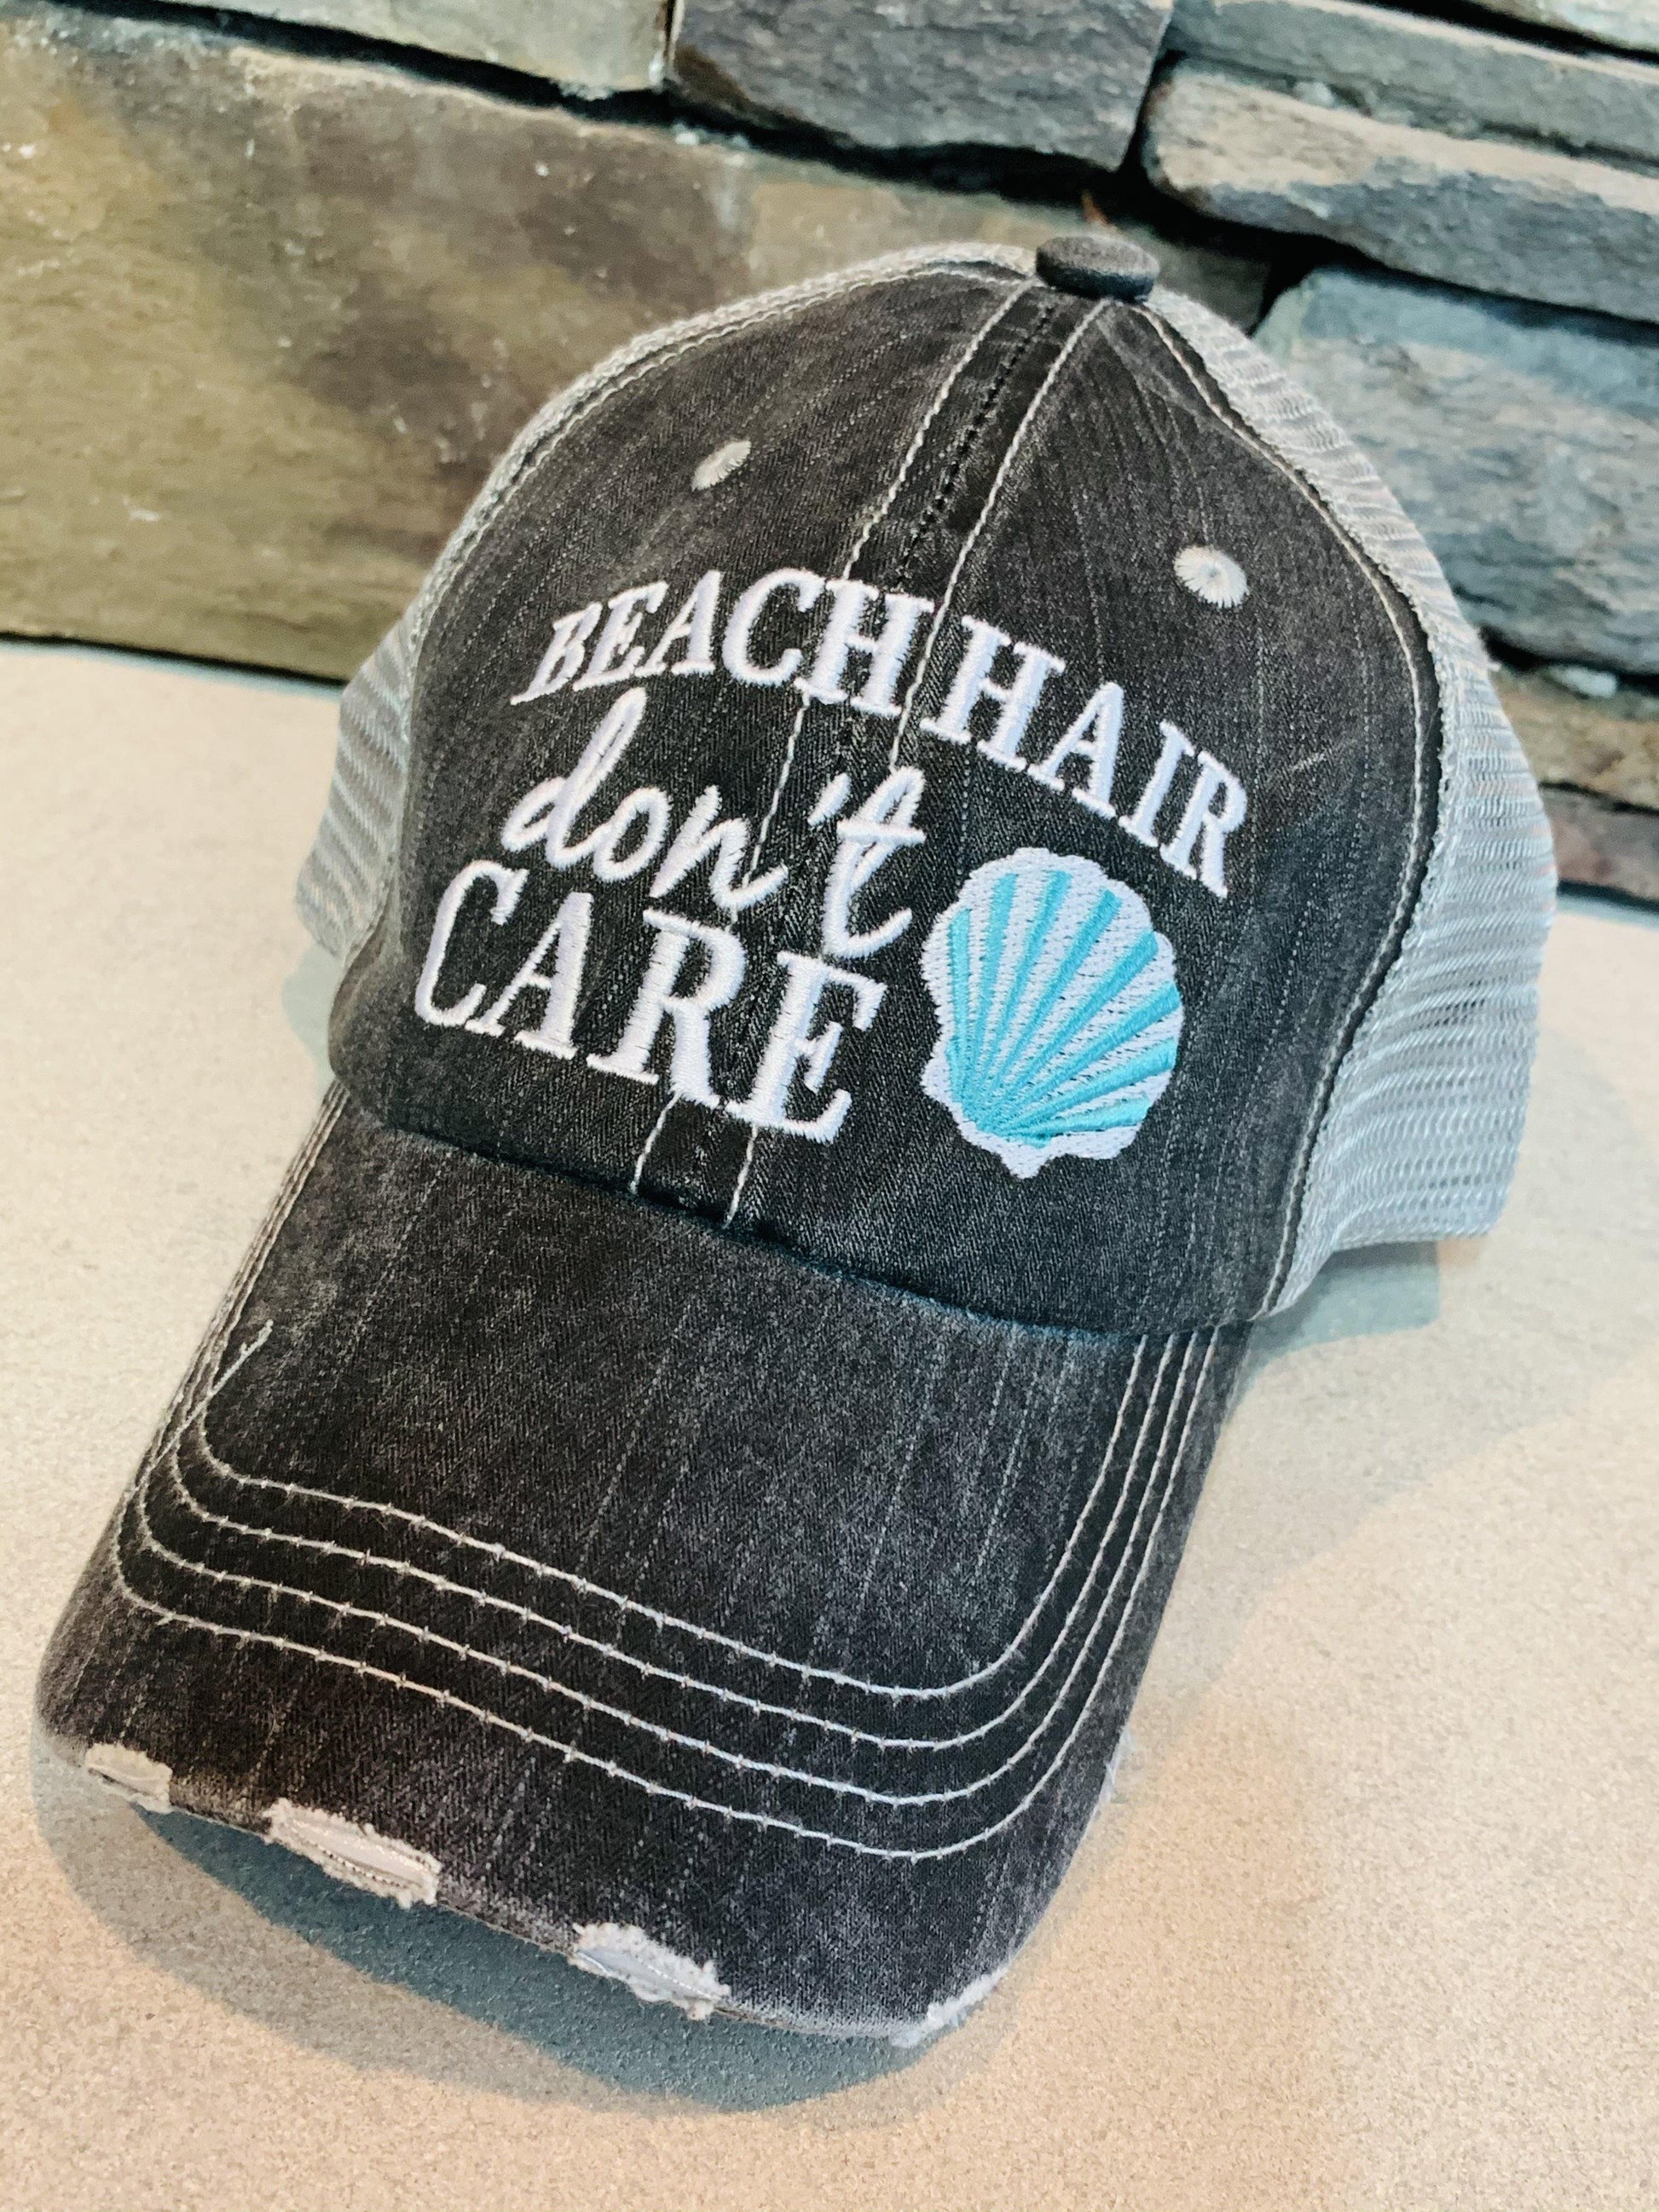 Beach hats! Beach hair don’t care • Gray trucker cap • Distressed • Adjustable • Seashell - Stacy's Pink Martini Boutique